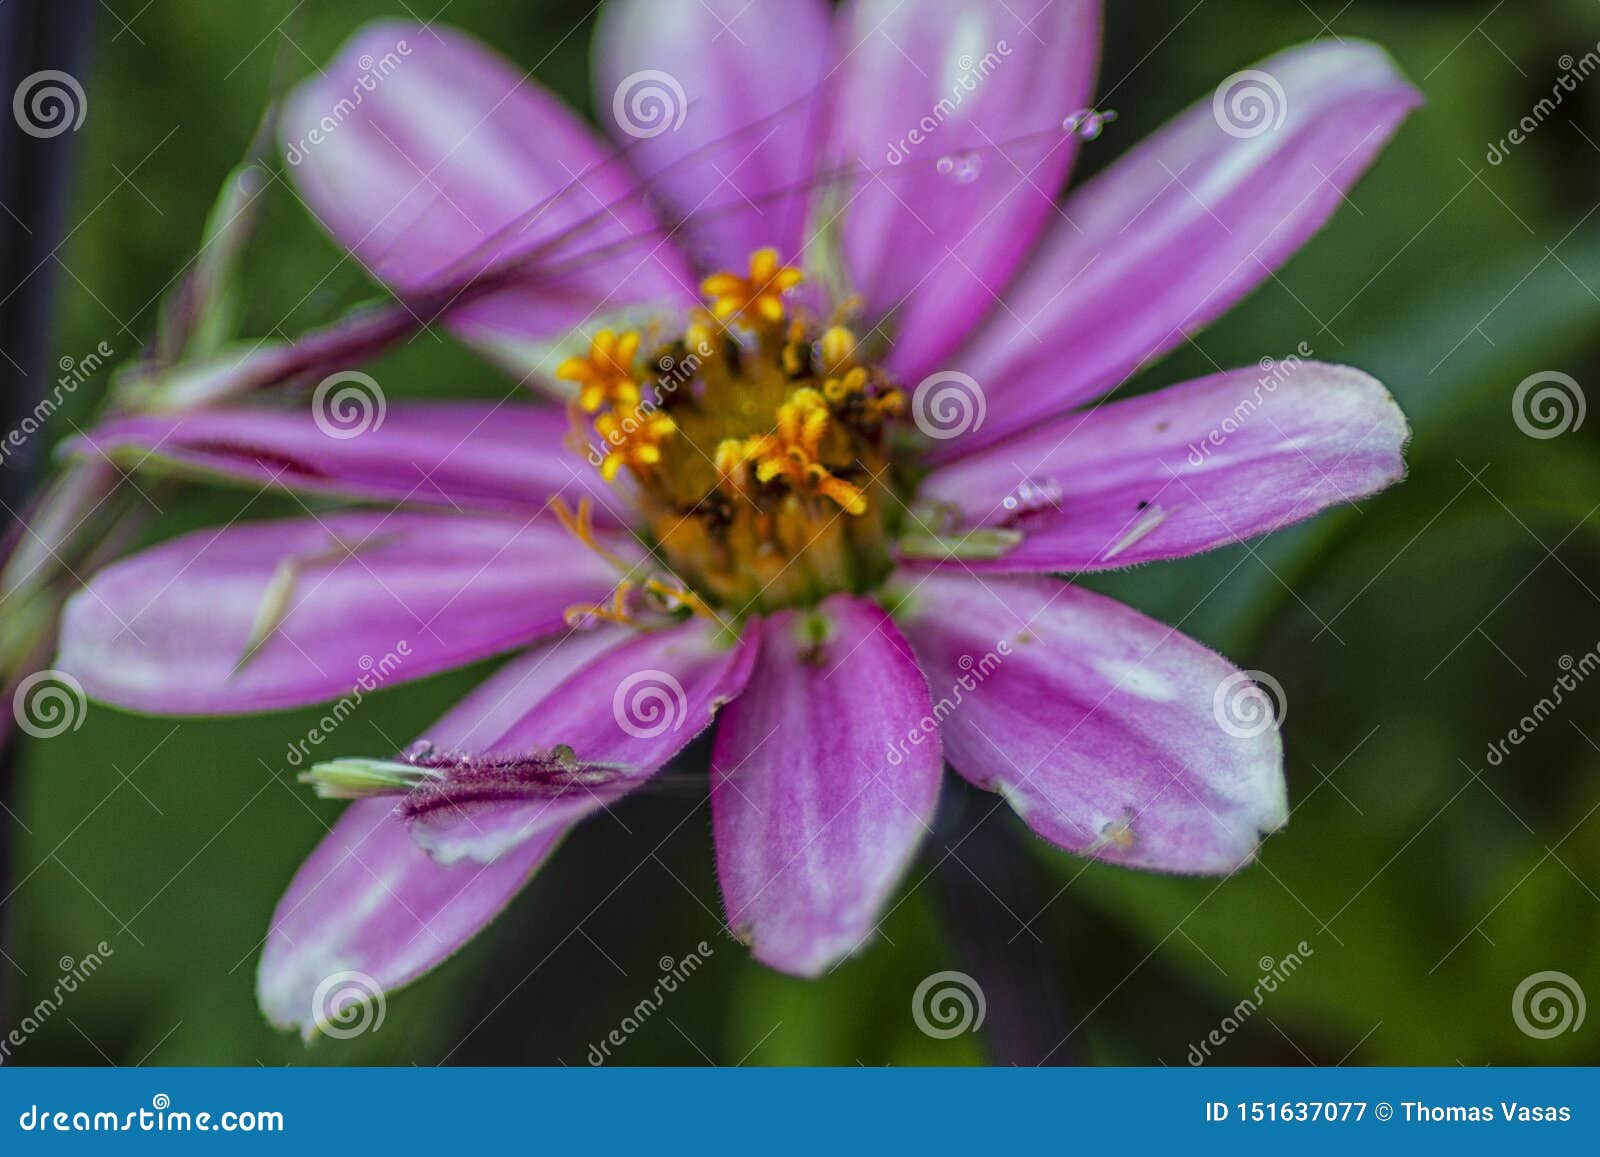 The Lonely Purple Flower In The Gardens Stock Image Image Of